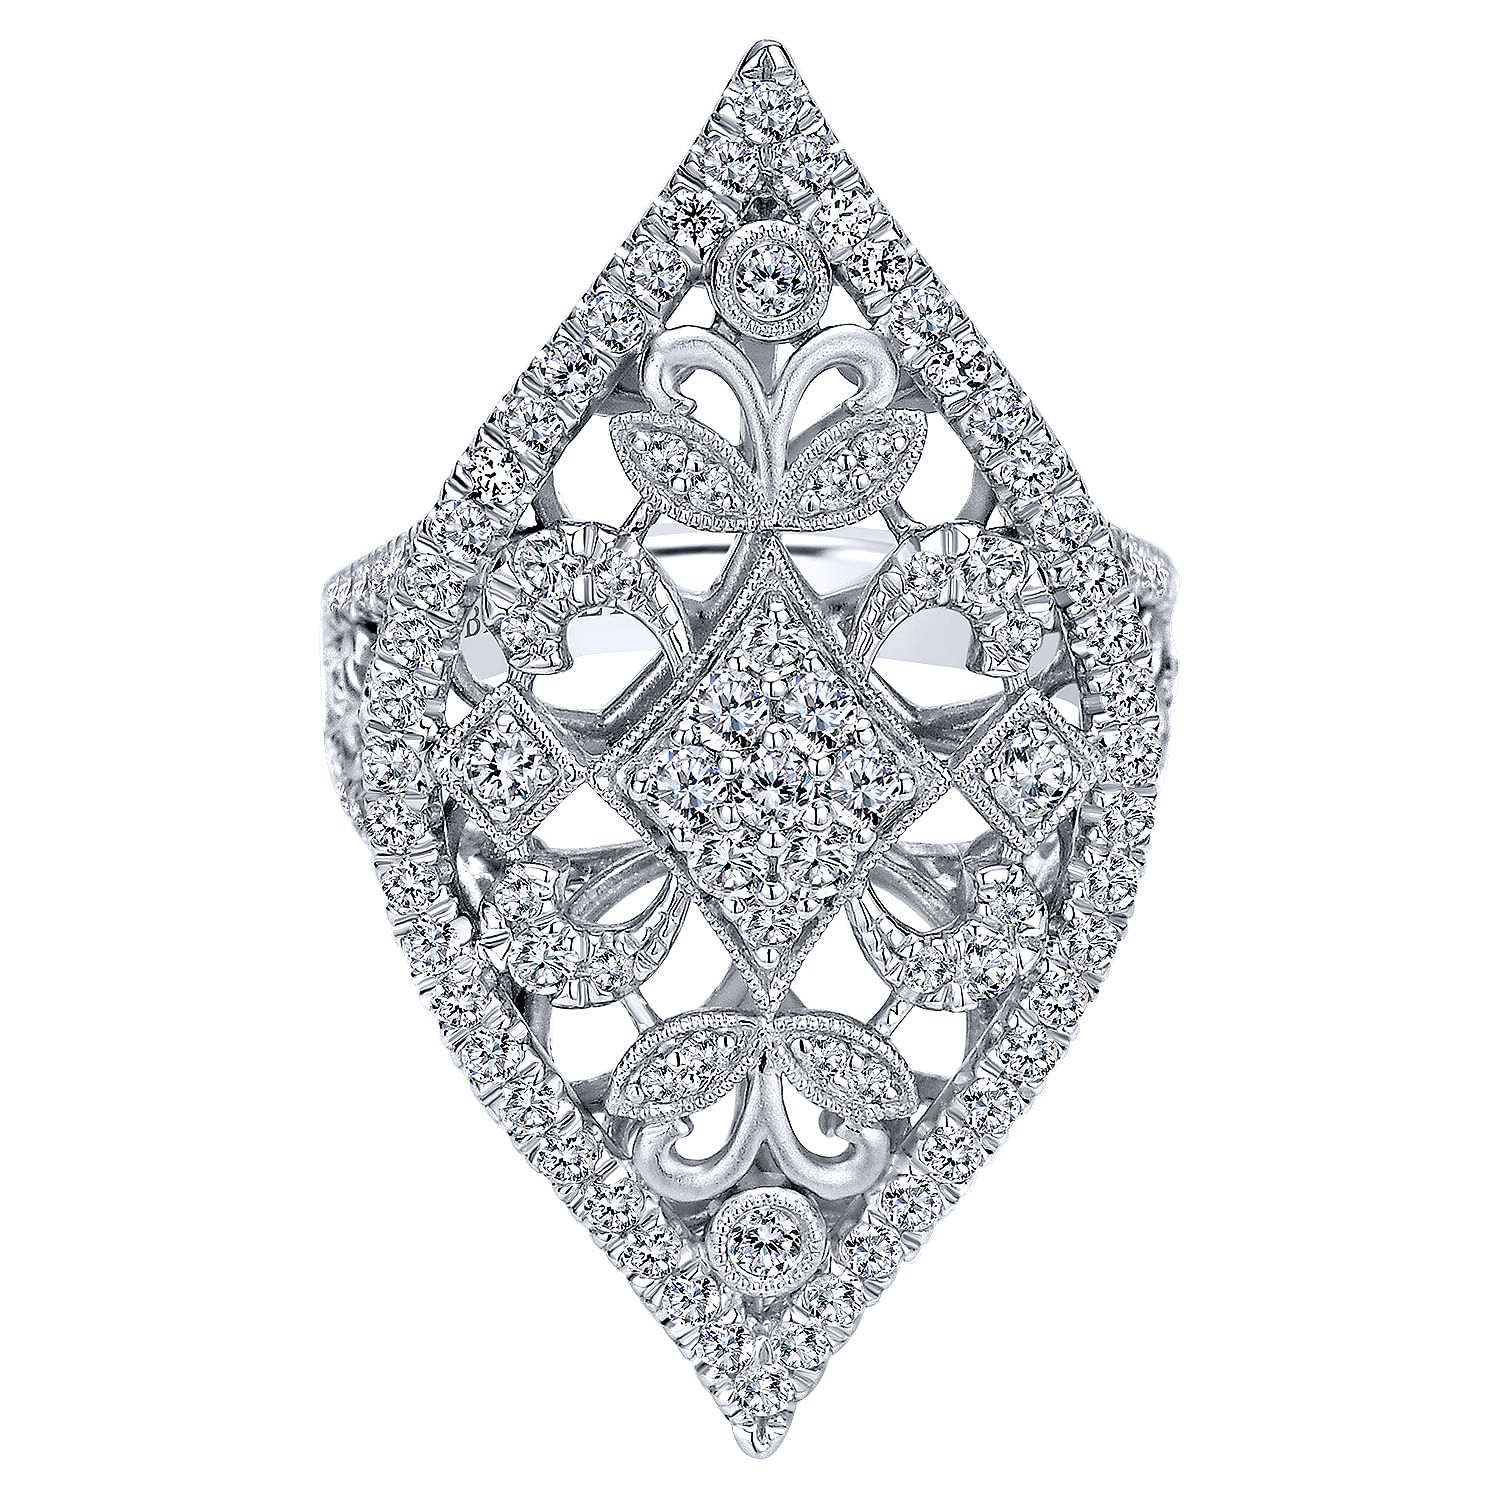 18K White Gold Pointed Oval Openwork Diamond Statement Ring